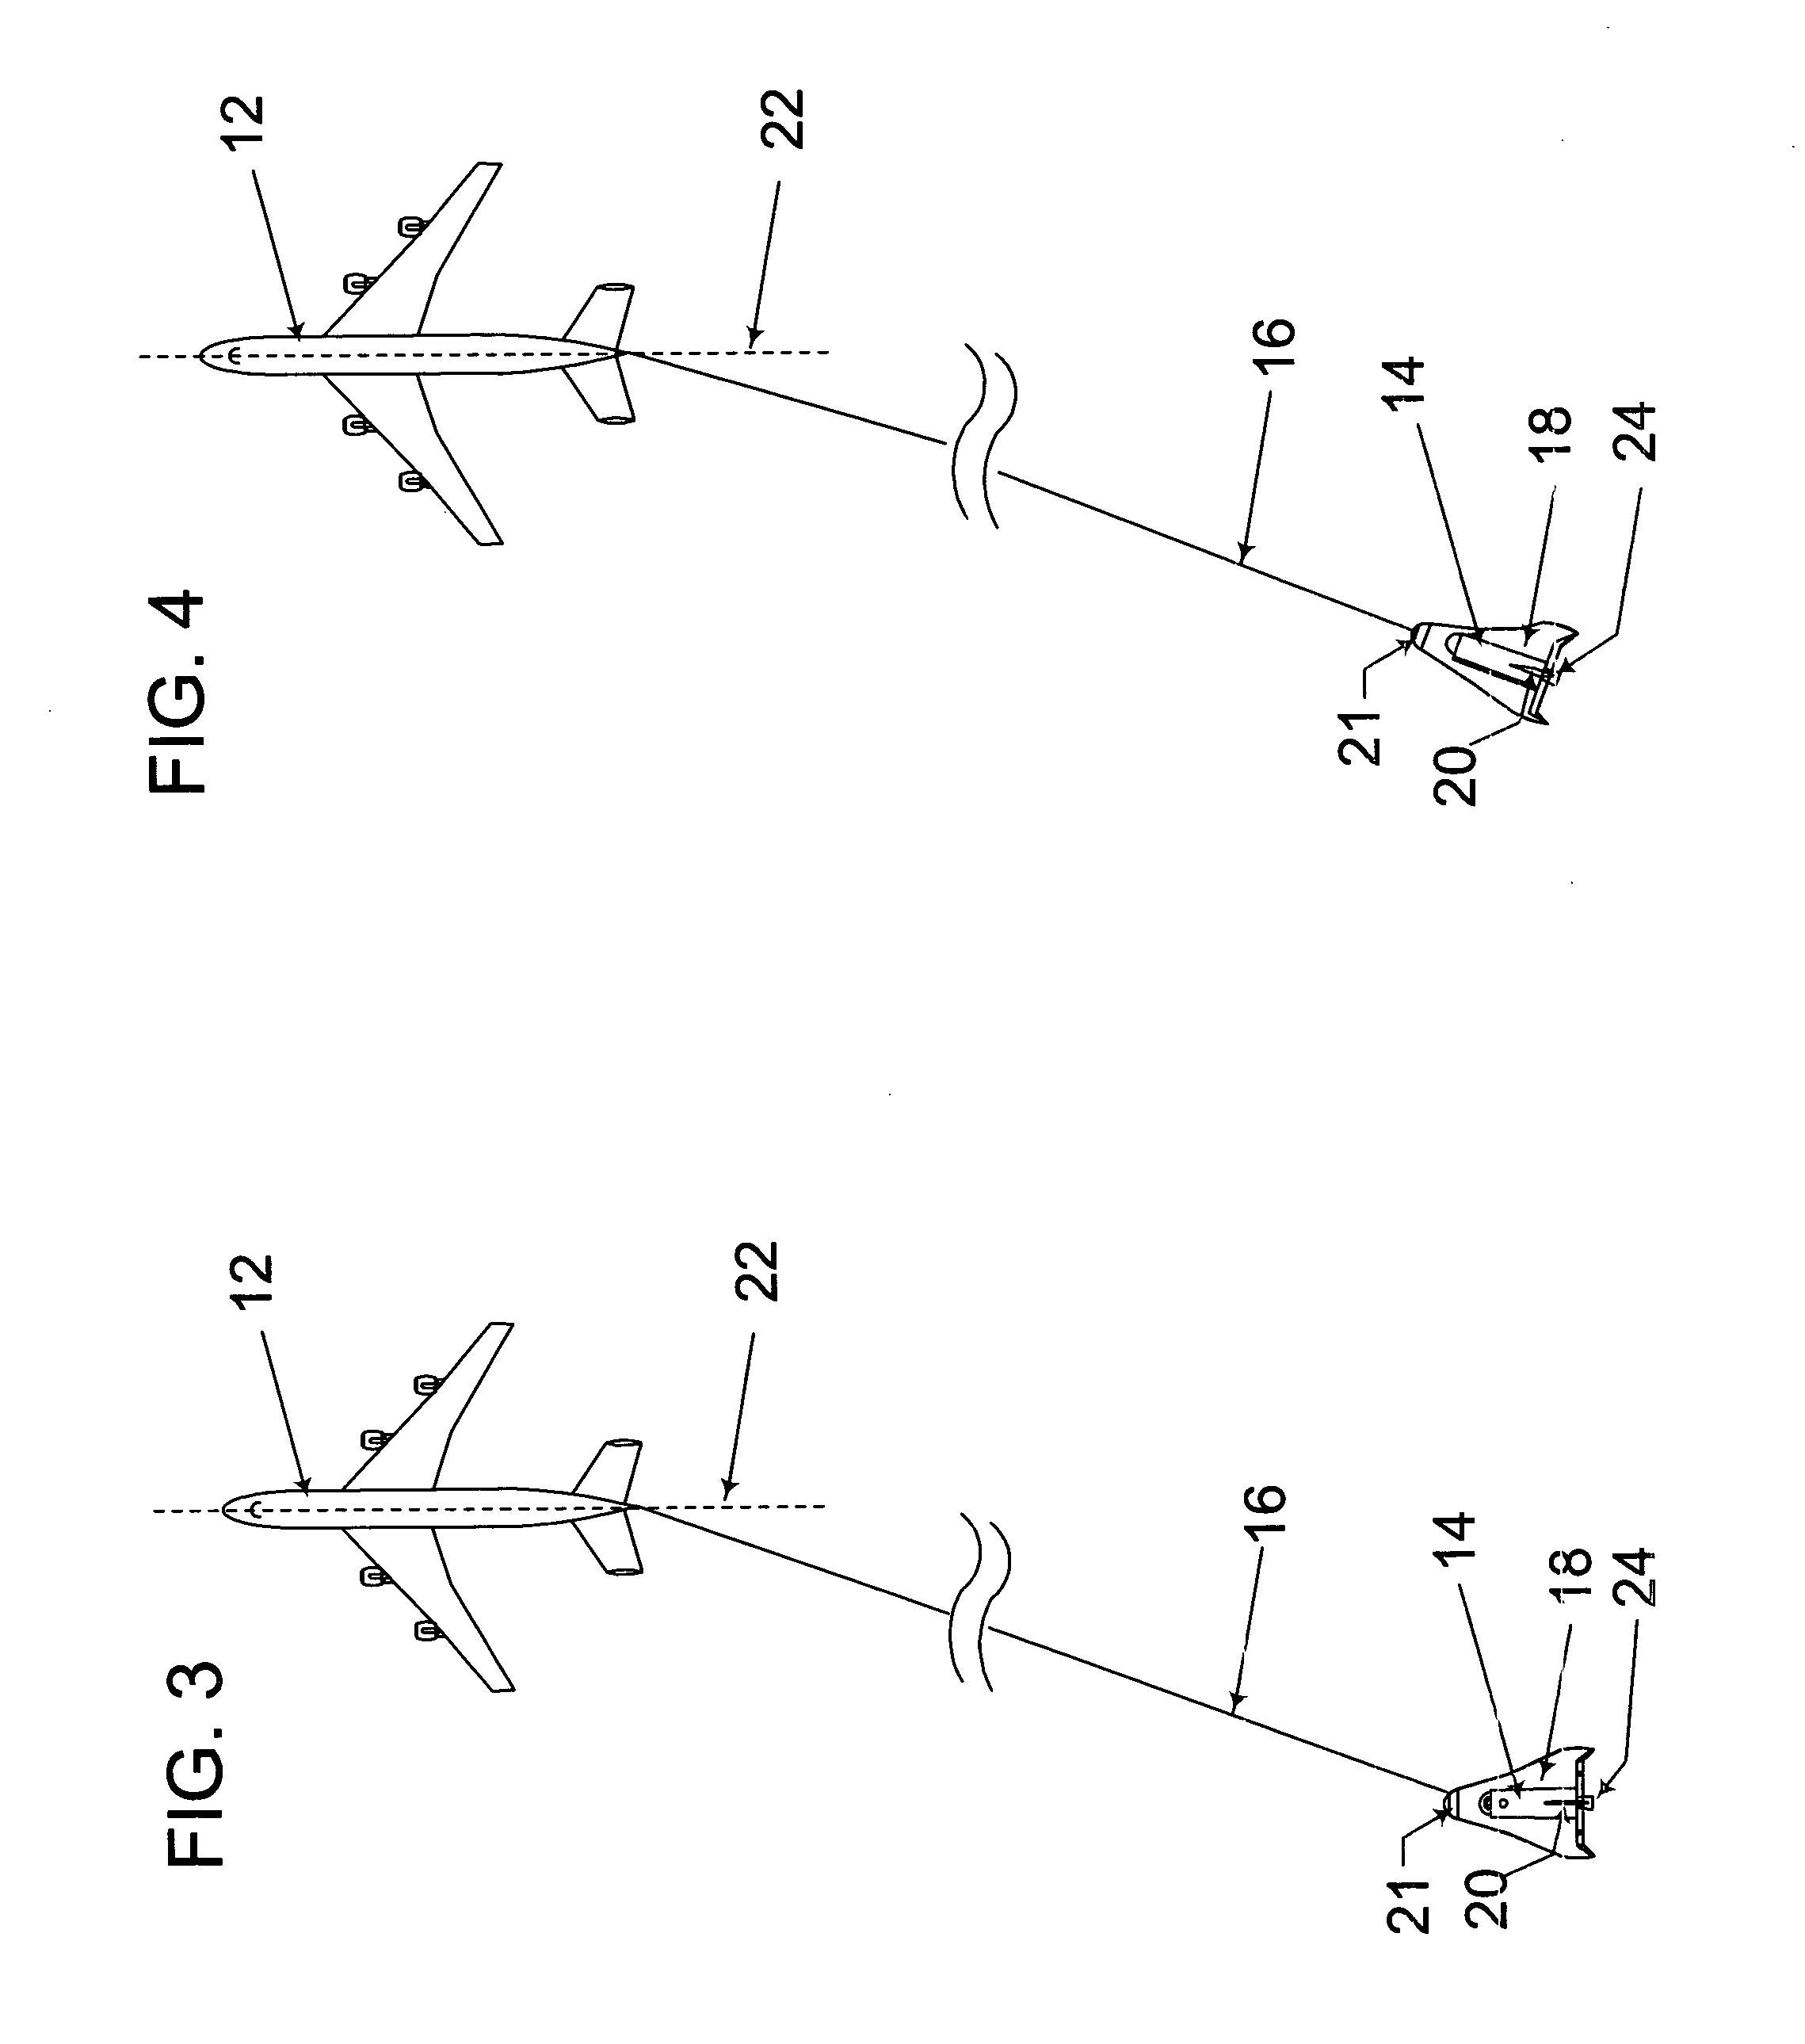 Method and system for accelerating an object